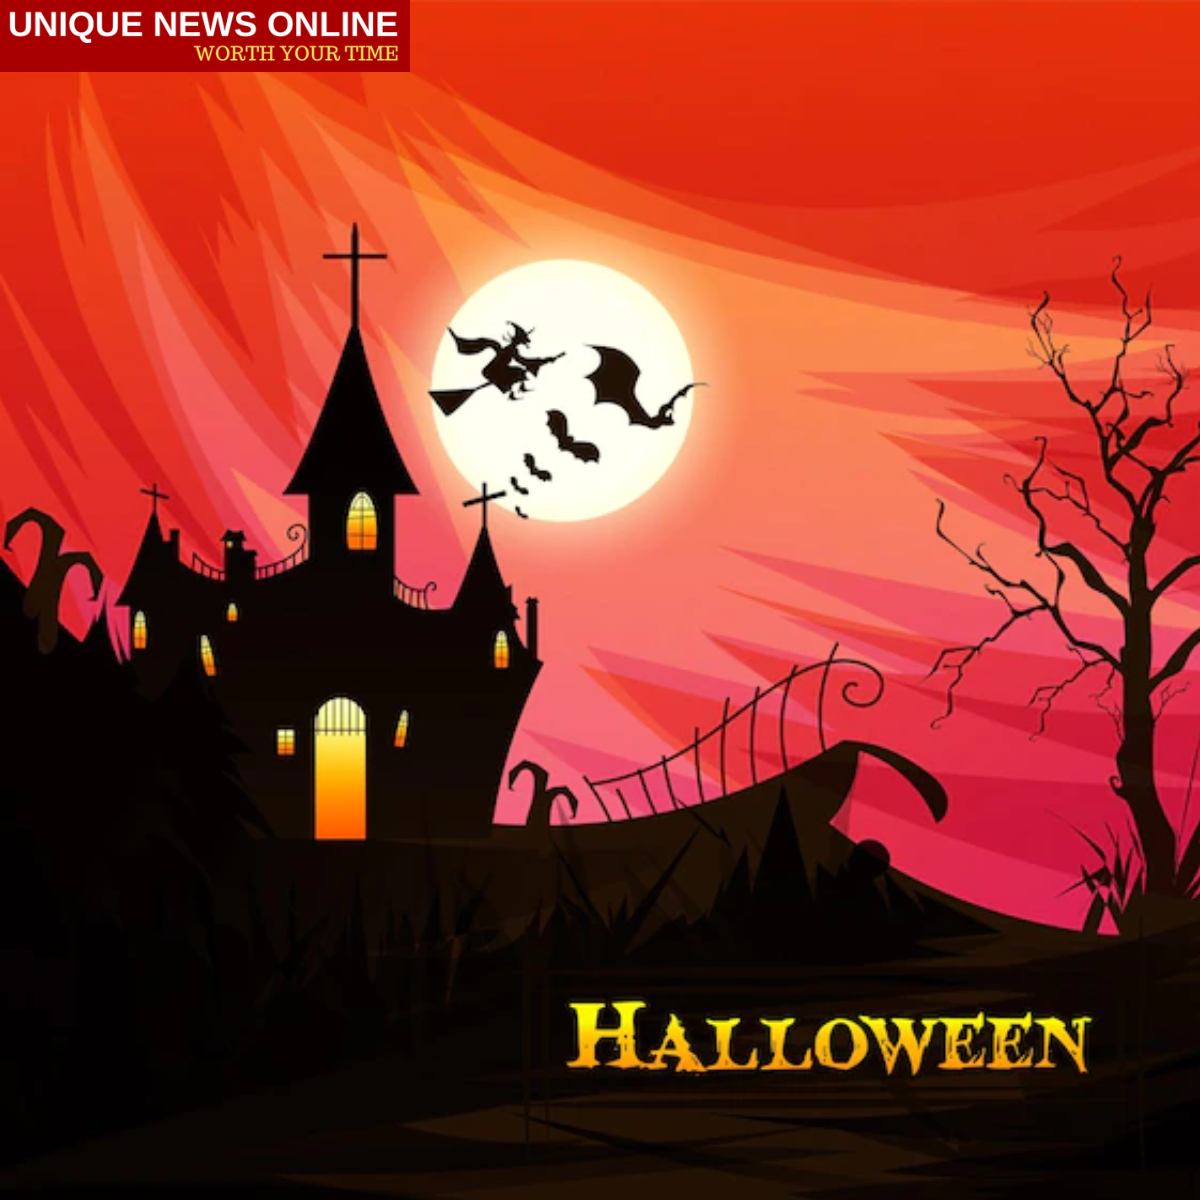 Halloween 2022 Wishes for Friends and Family: Stickers, WhatsApp DP, Instagram Captions, Quotes, HD Images, Sayings, Greetings and Messages for friends and family